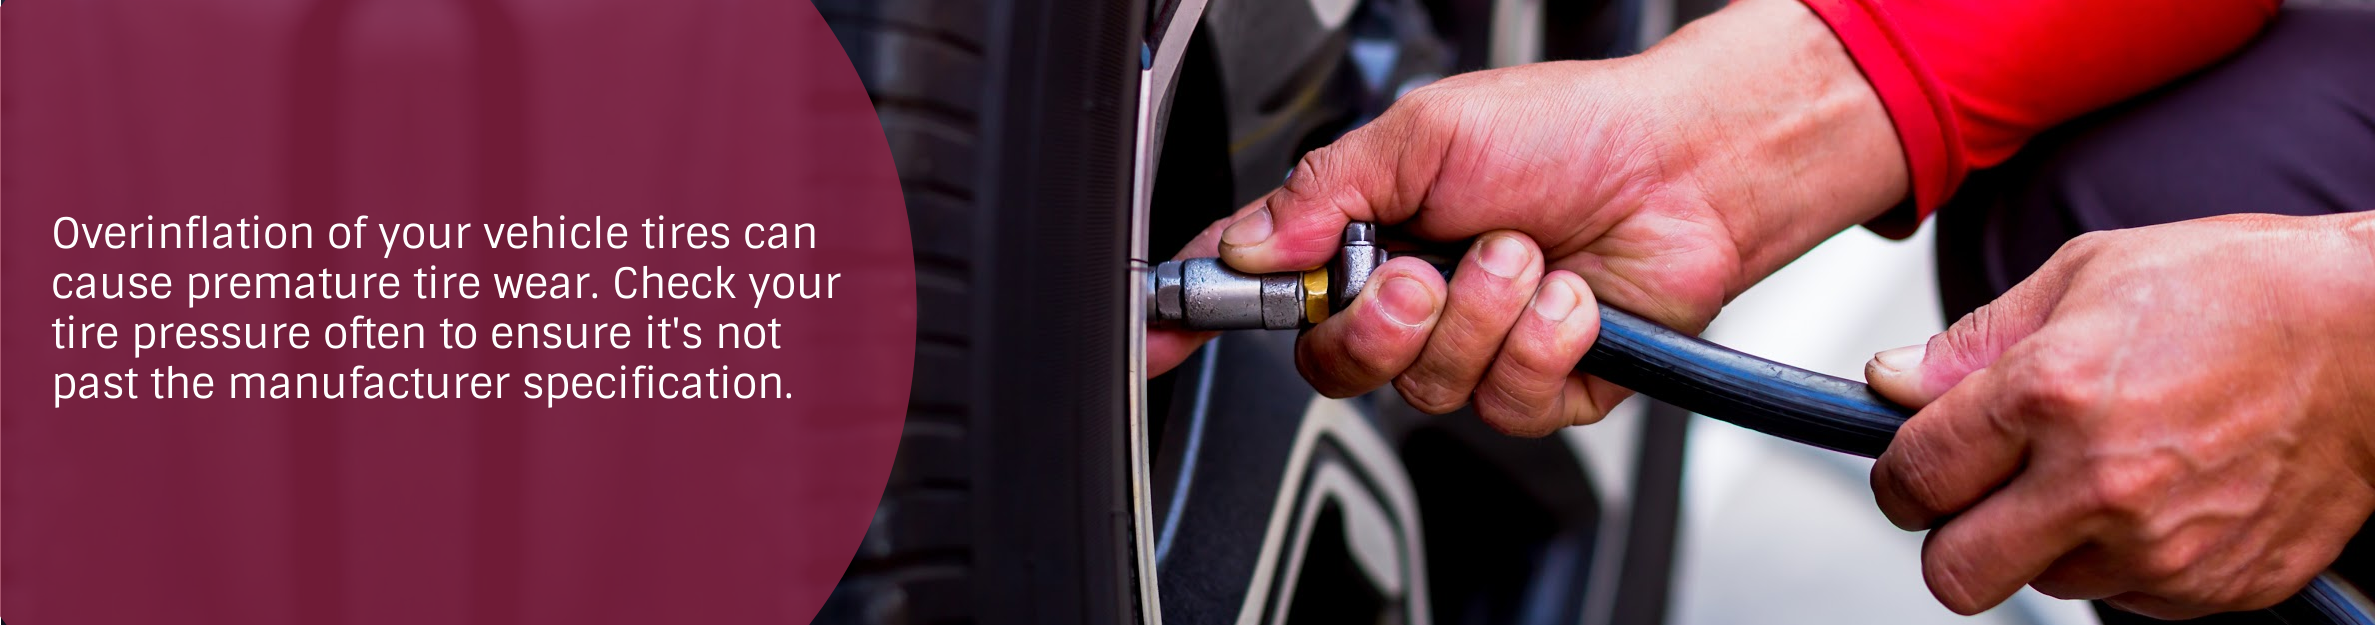 Photo: Putting air in a tire
Text: Overinflation of your vehicle tires can cause premature tire wear. Check your tire pressure often to ensure it's not past the manufacturer specification.